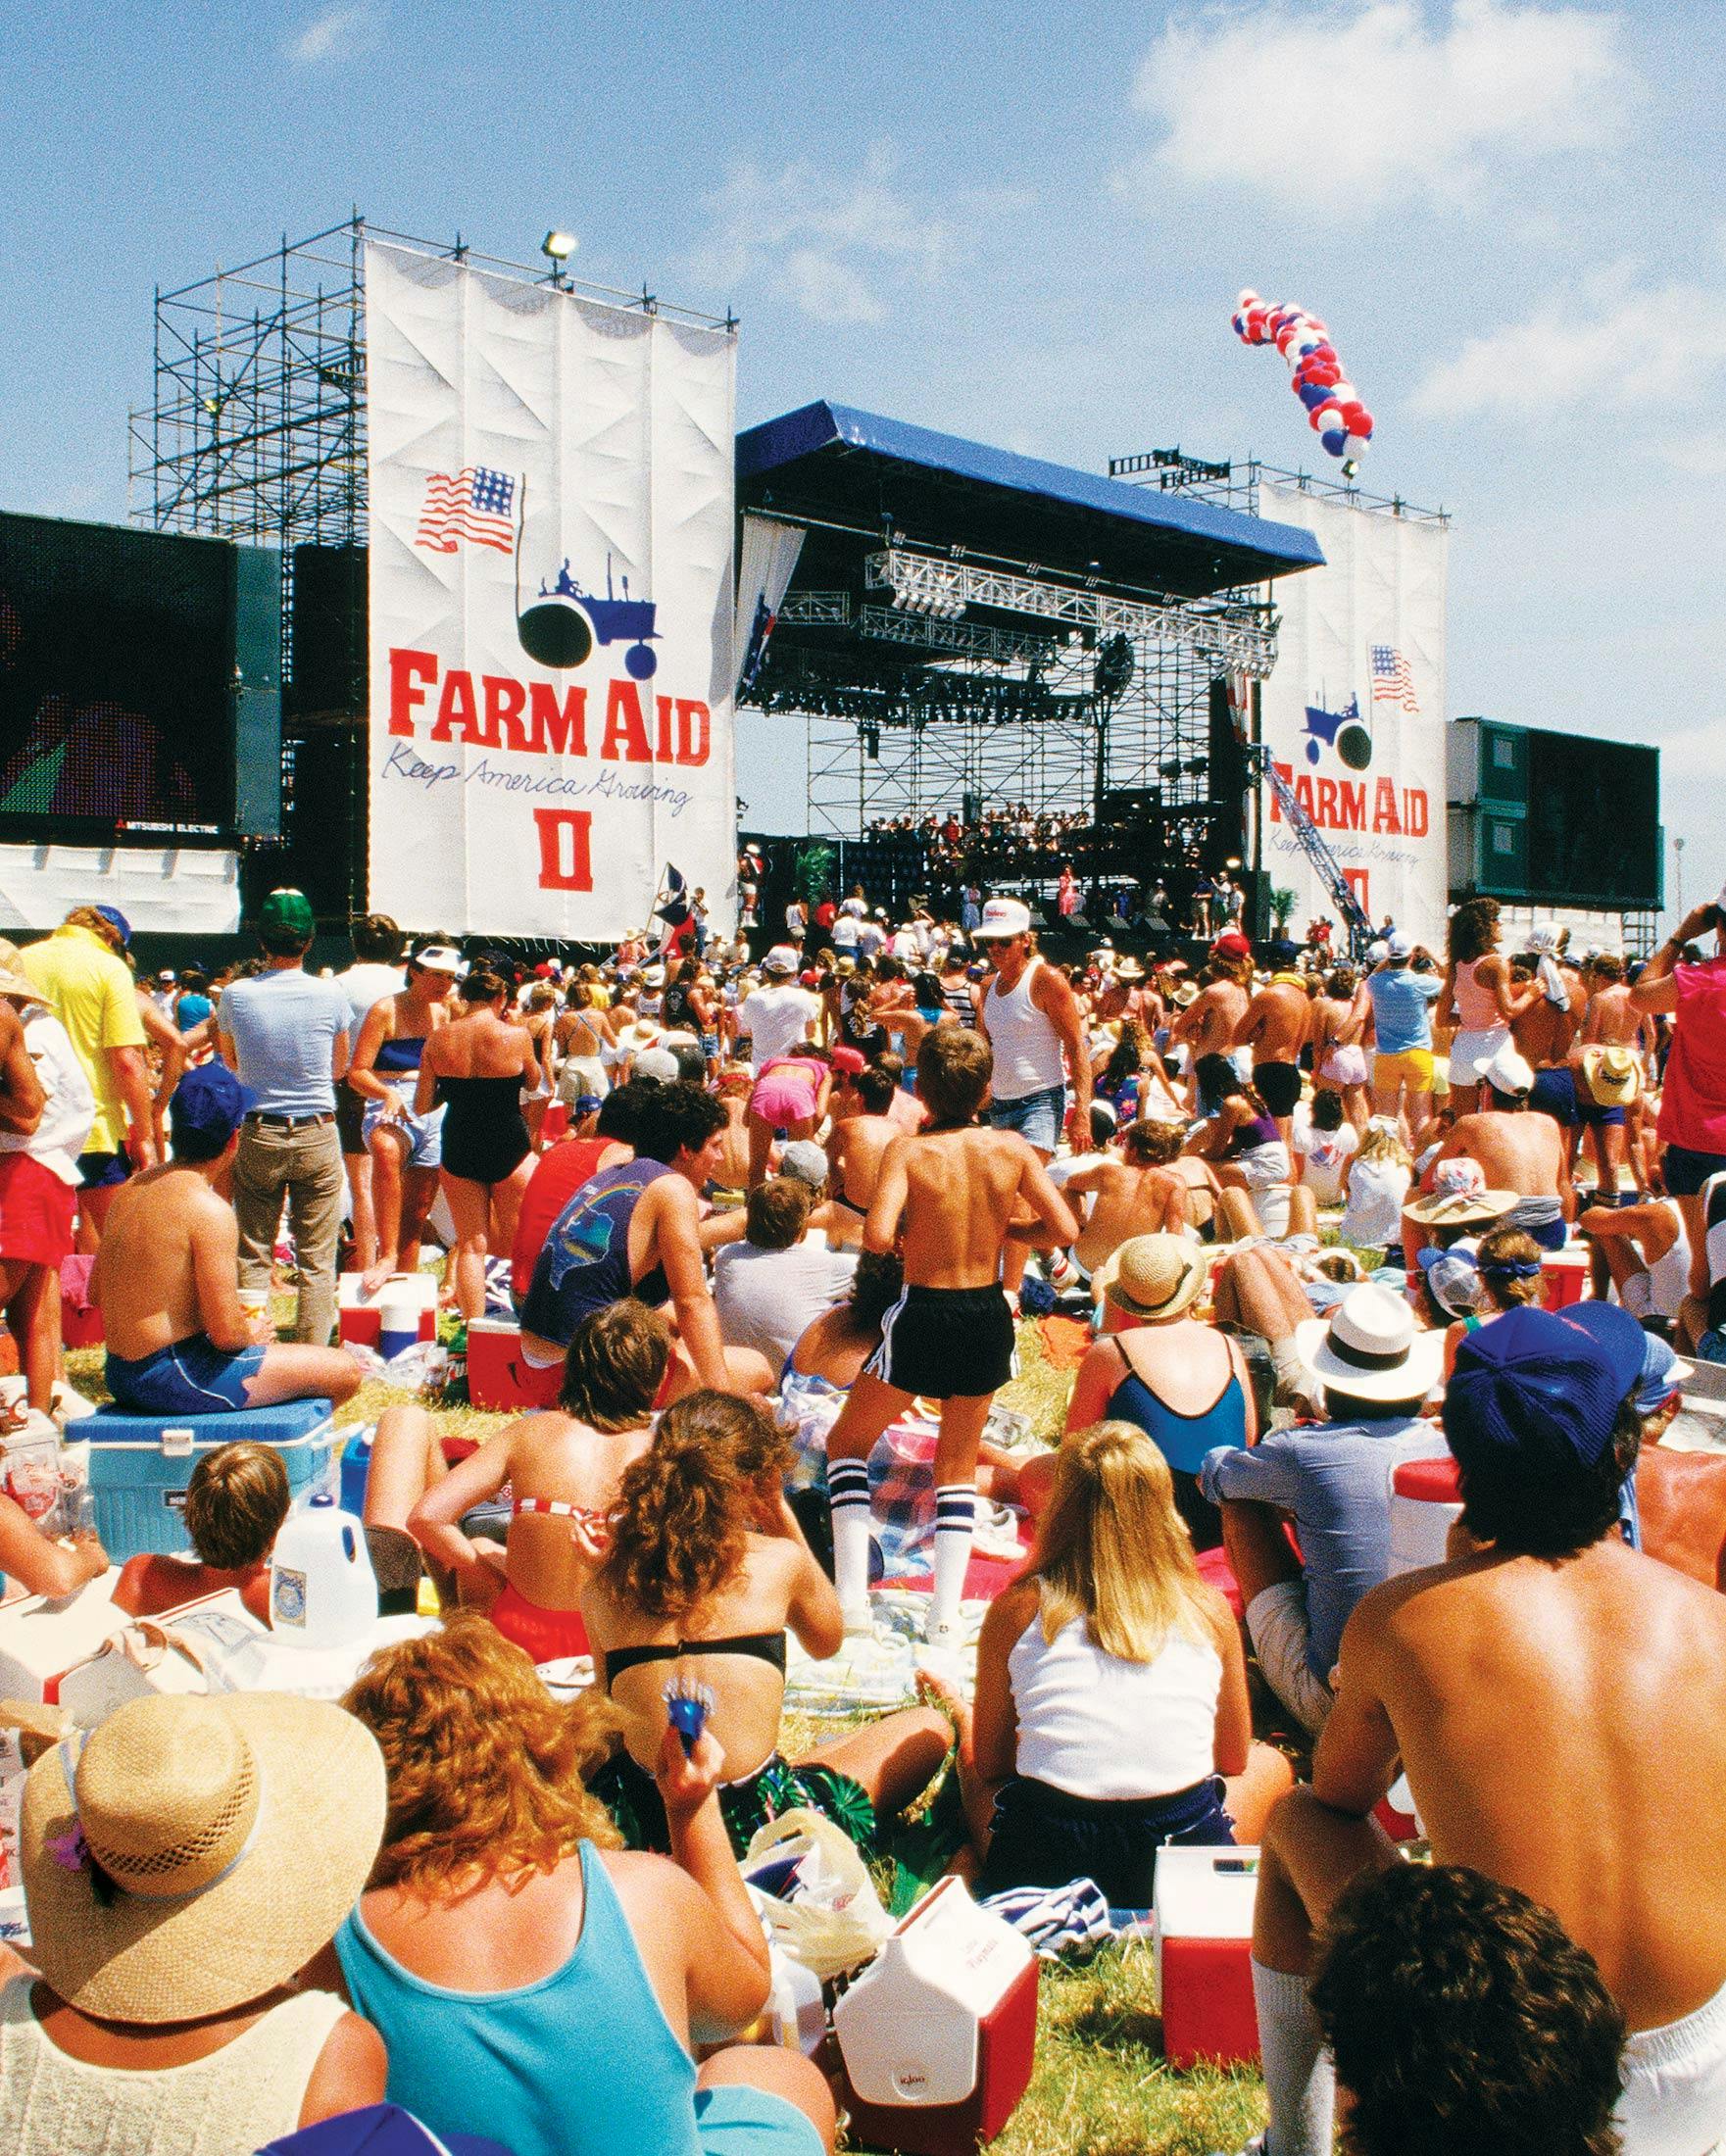 The view from the audience at Farm Aid II, in Manor, Texas, on July 4, 1986.